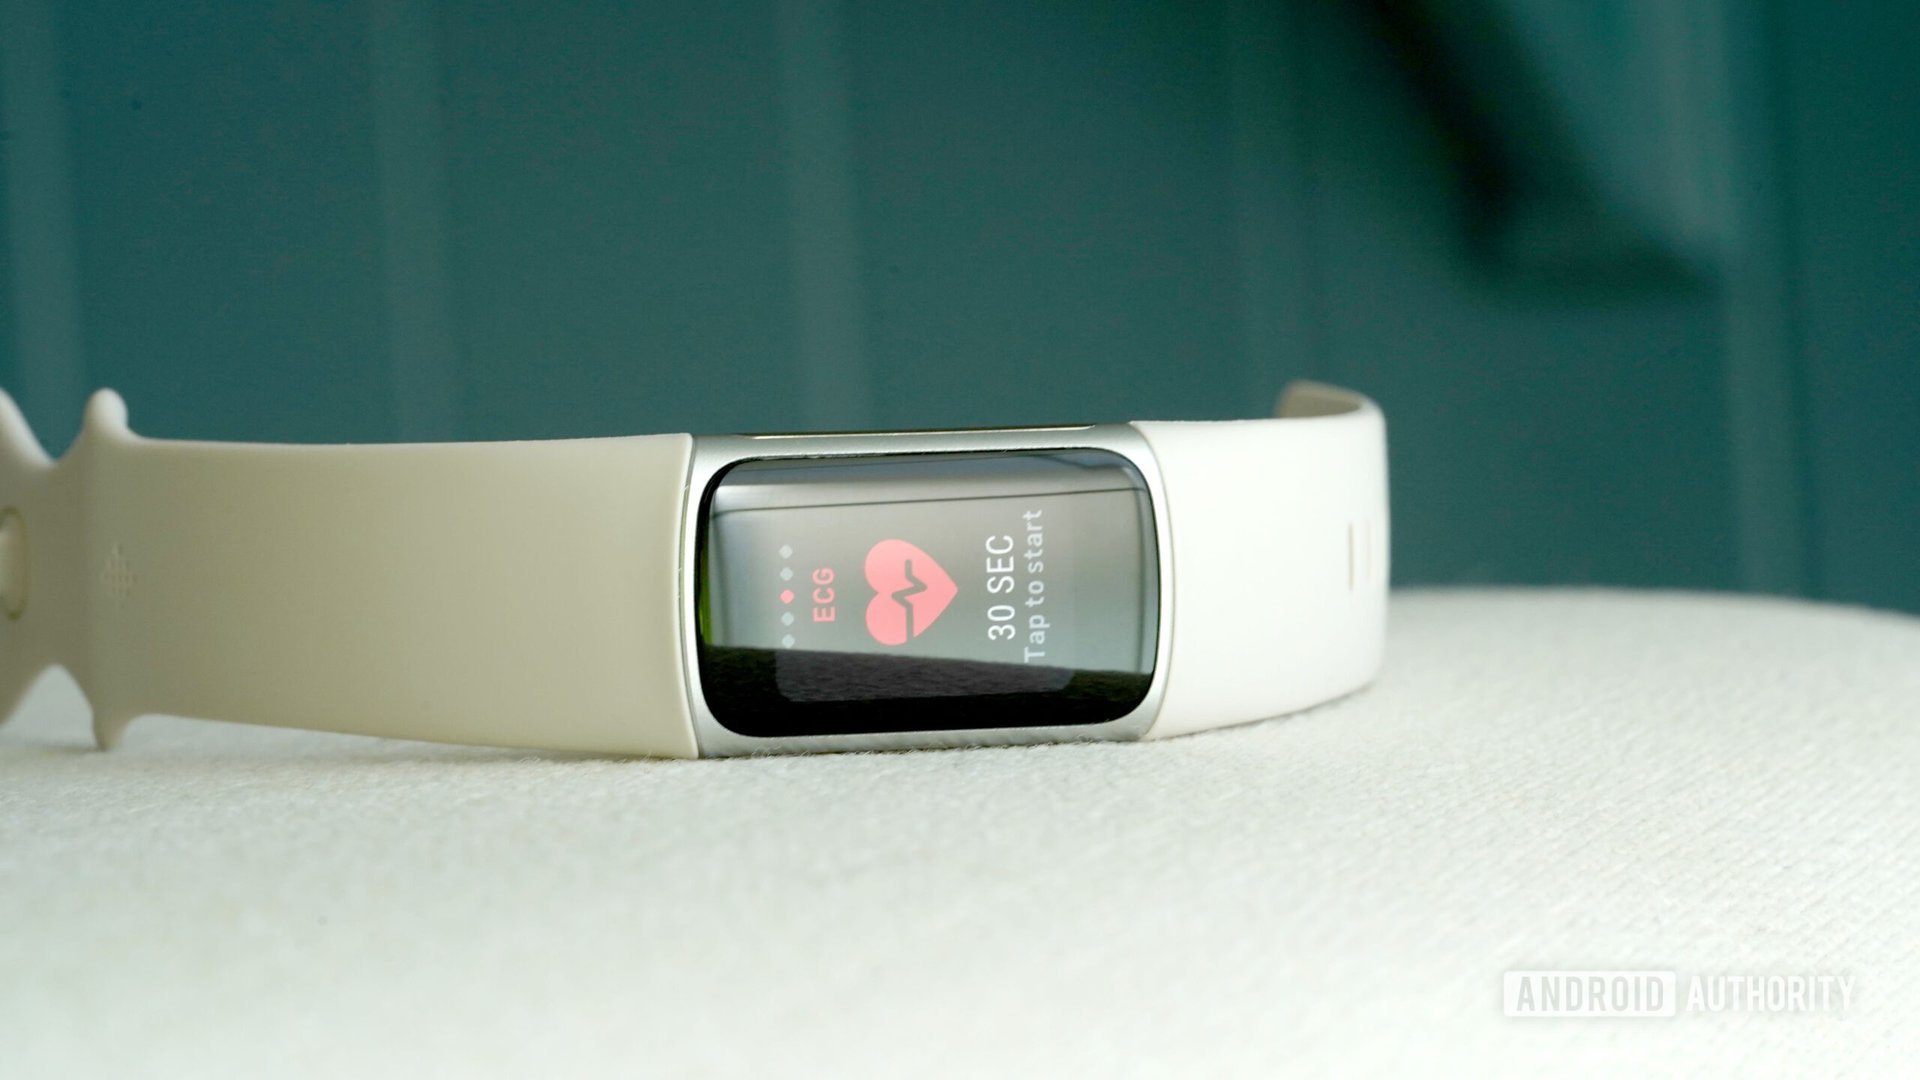 Apple Watch vs Fitbit: How accurate are they as sleep trackers?